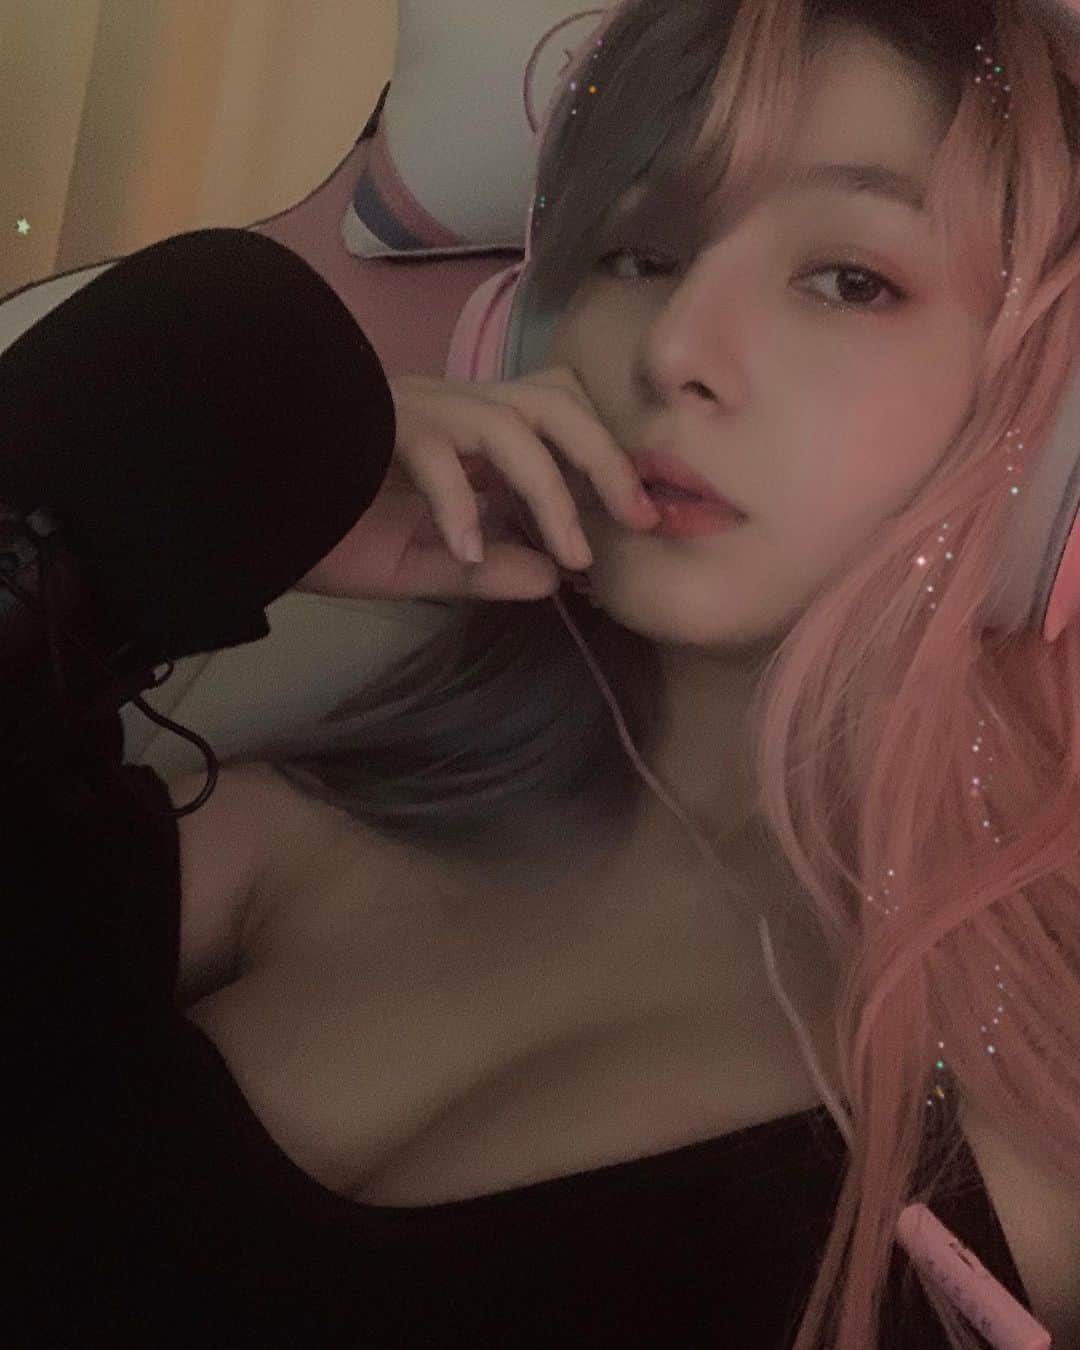 Shannonのインスタグラム：「Since my schedule is a bit more free I’ll be streaming again soon this week! I’ll make sure to set a date and let everyone know in advance! Until then stay safe ❤️💫」